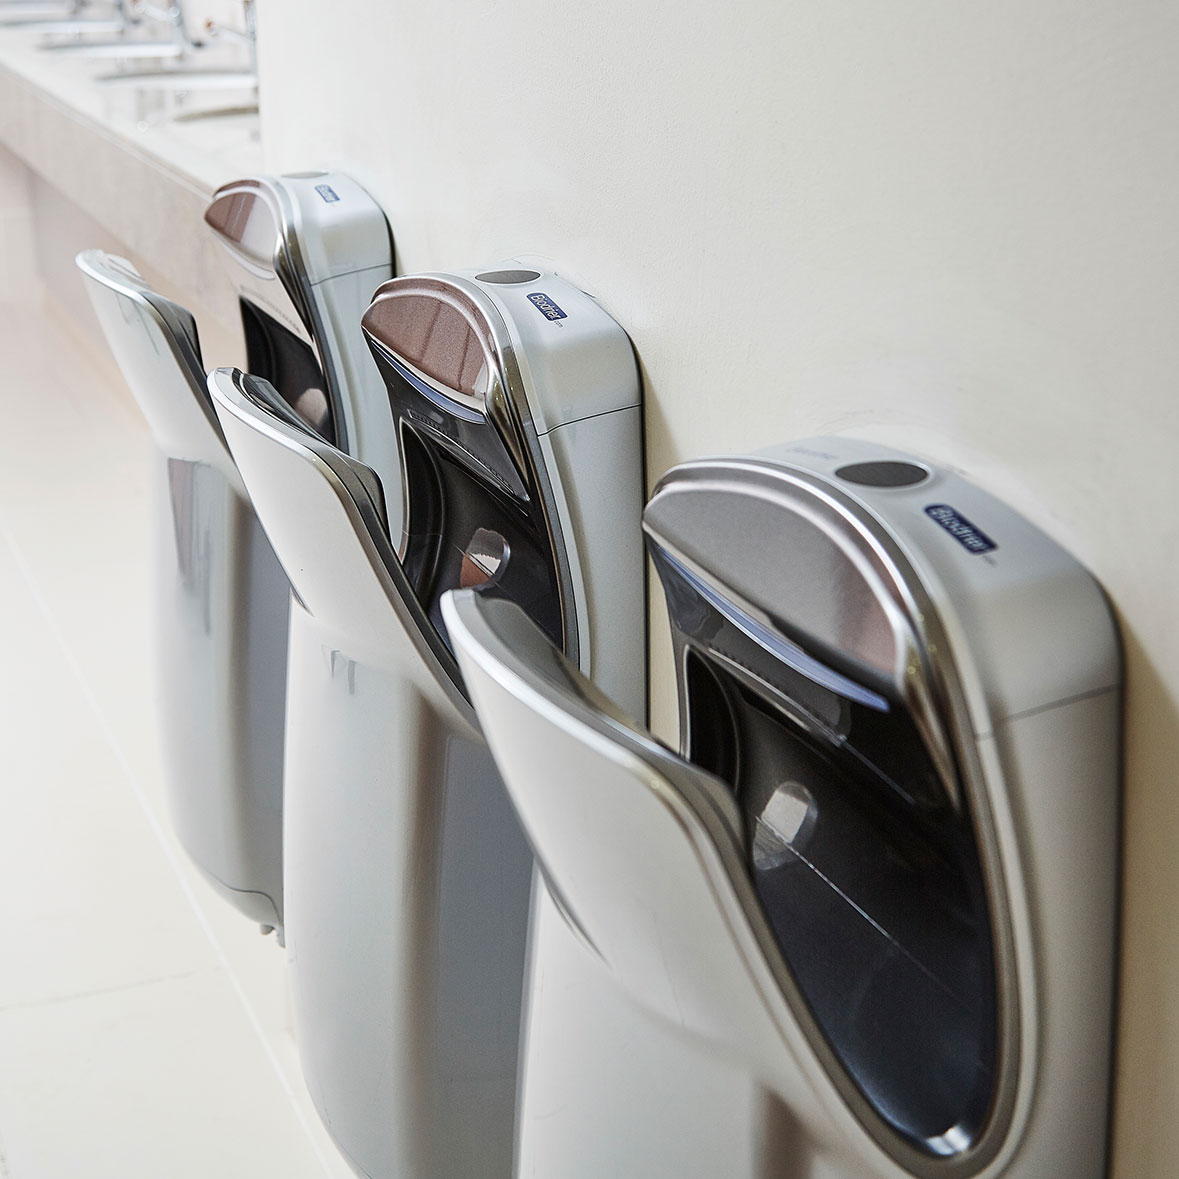 Automatic hand dryers are key to the touchless washrooms which can help restaurants, bars, shops and all kinds of hospitality to maintain safety as the pandemic prevails.